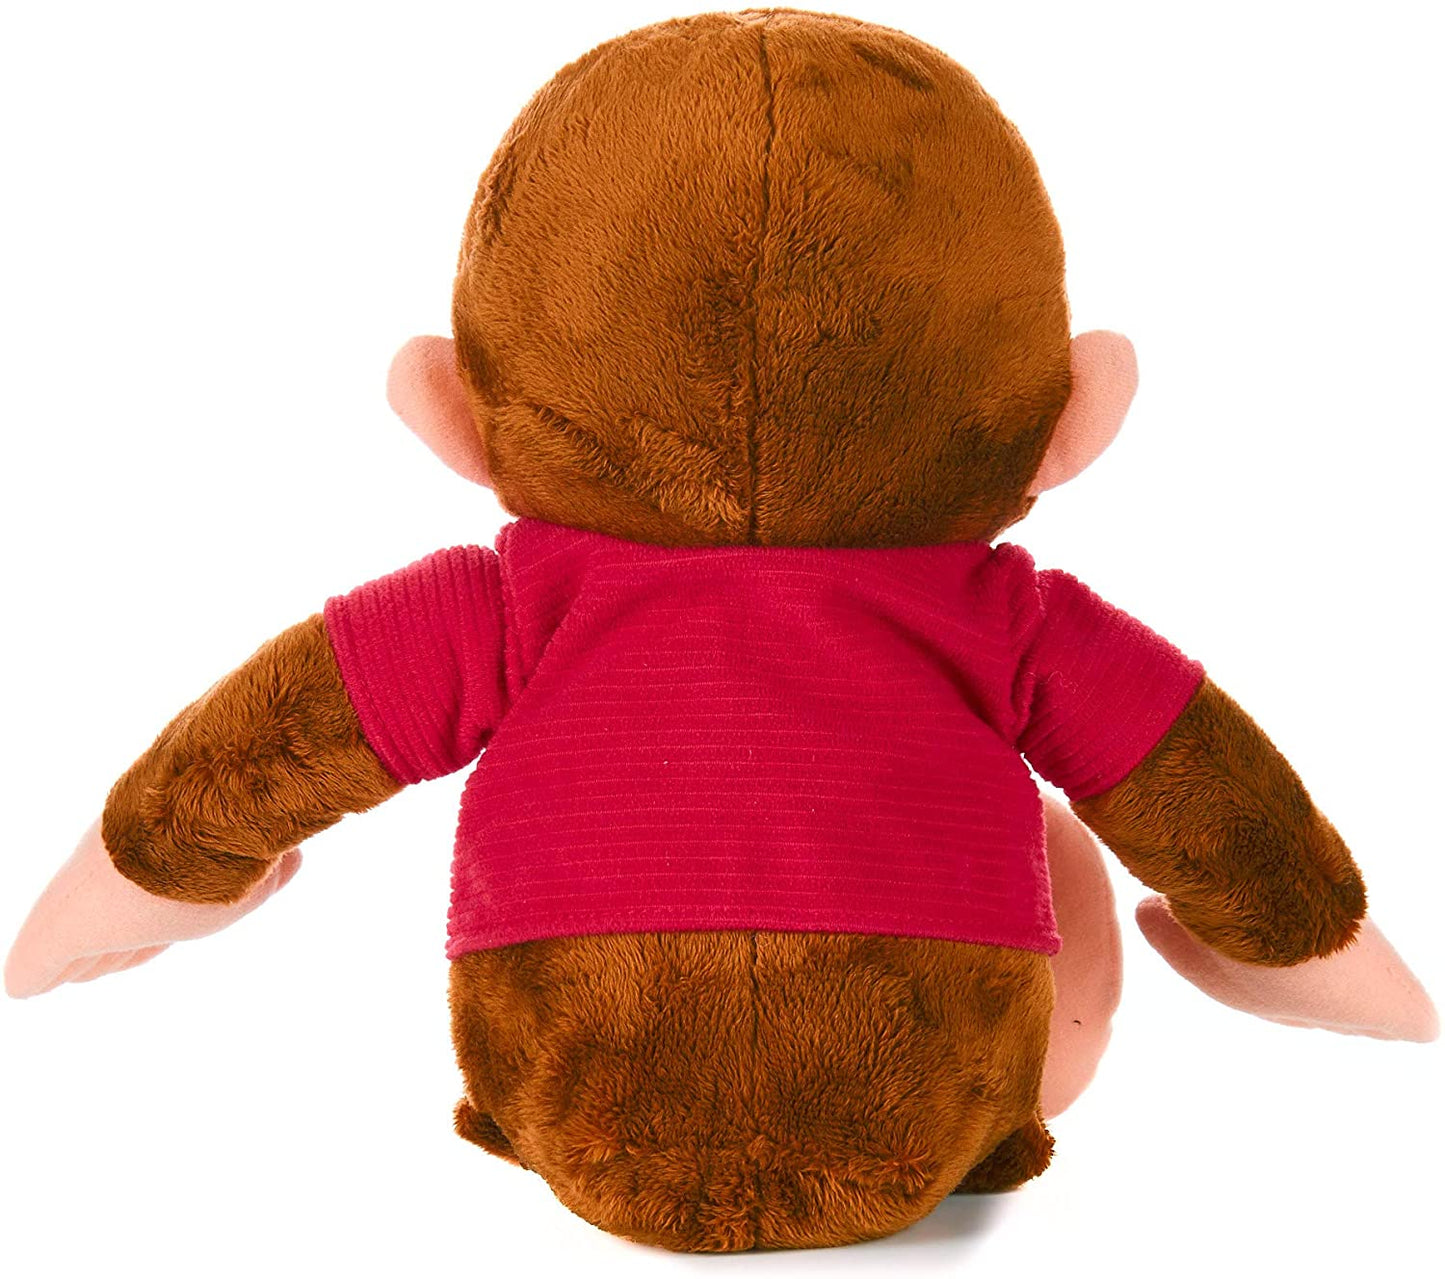 Large Curious George Monkey Plush - Classic George 12" Super Soft, Adorable, Charmingly Detailed Stuffed Animal